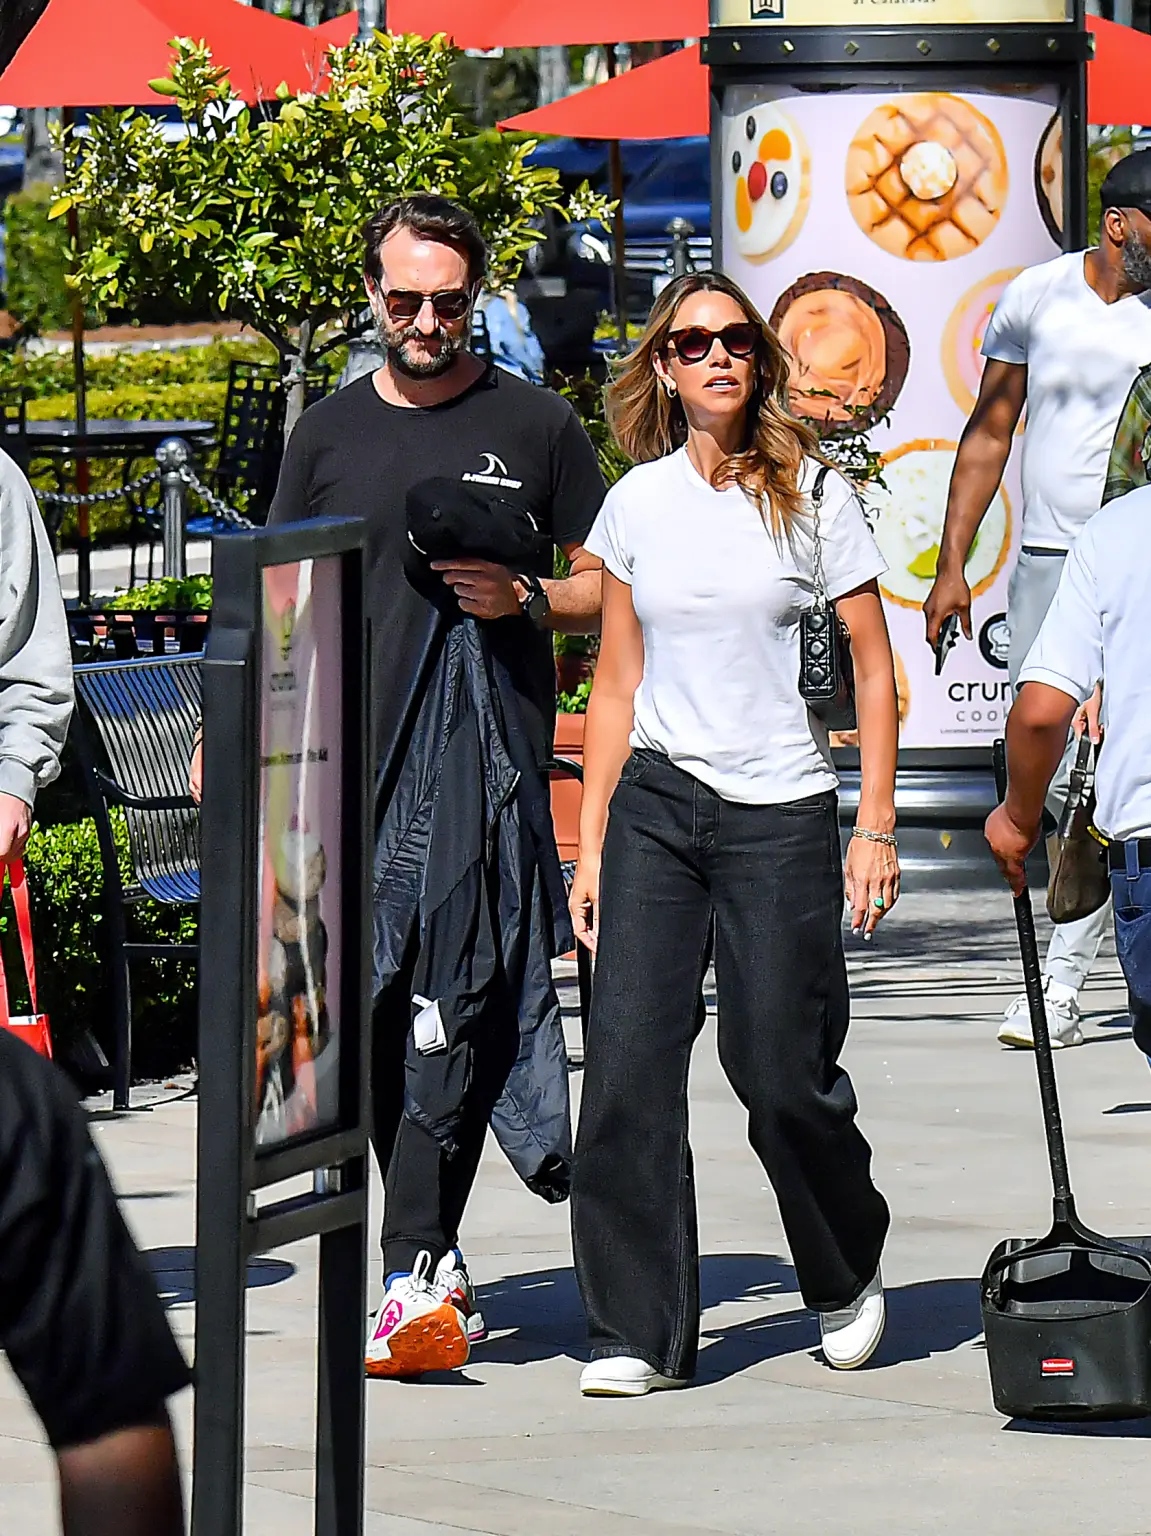 The pair dressed casually while as they made their way through the Calabasas Commons.